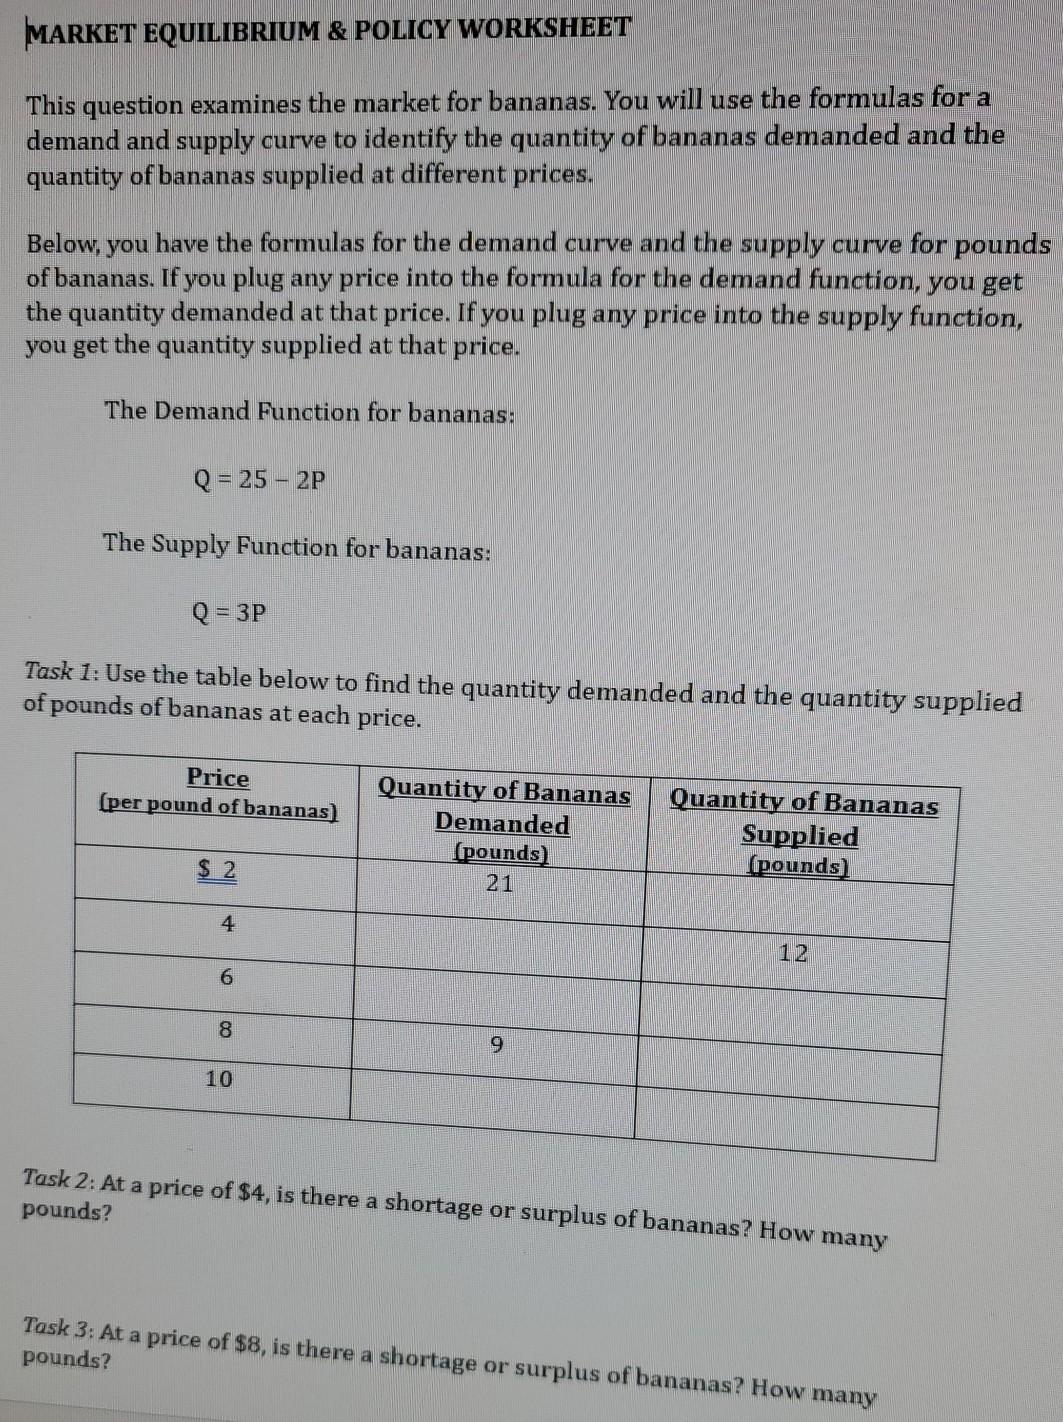 supply-and-demand-equilibrium-worksheet-free-download-gambr-co